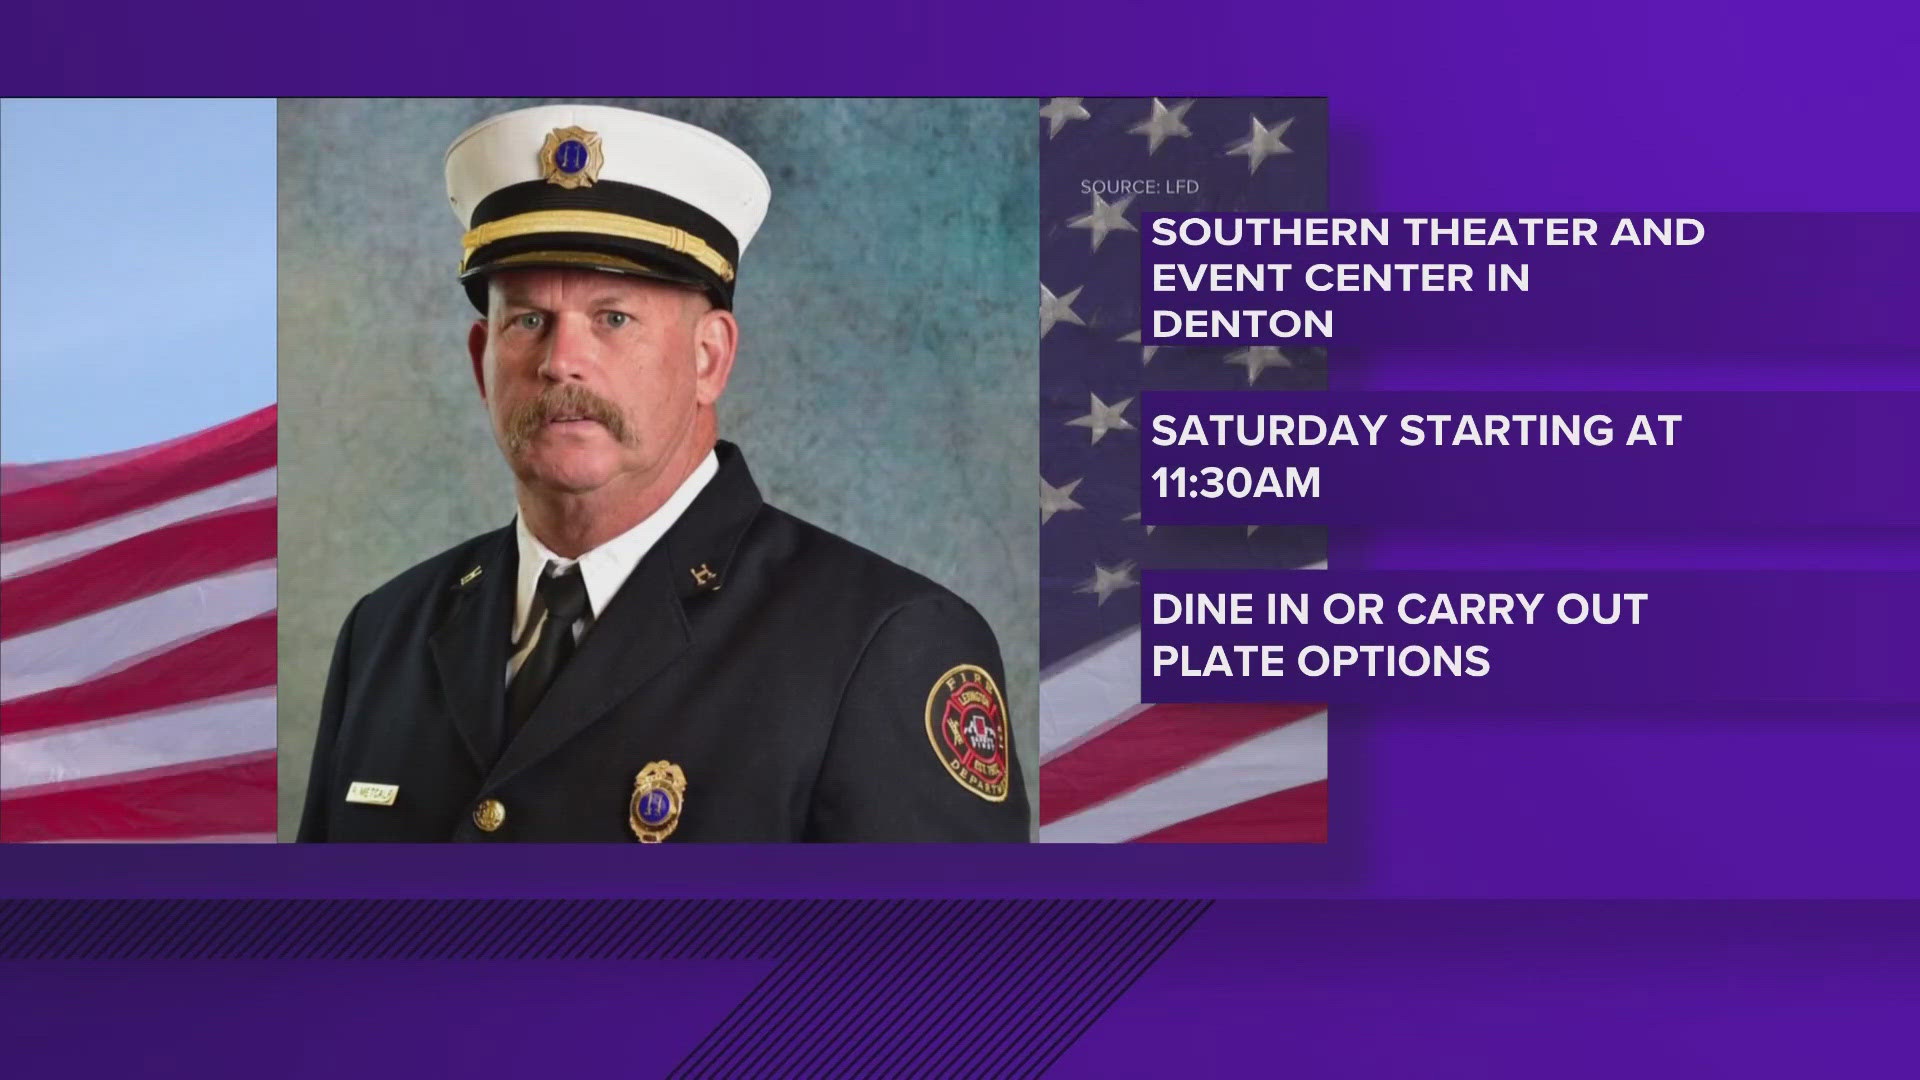 Proceeds from the event will support the family of Captain Ronnie Metcalf.